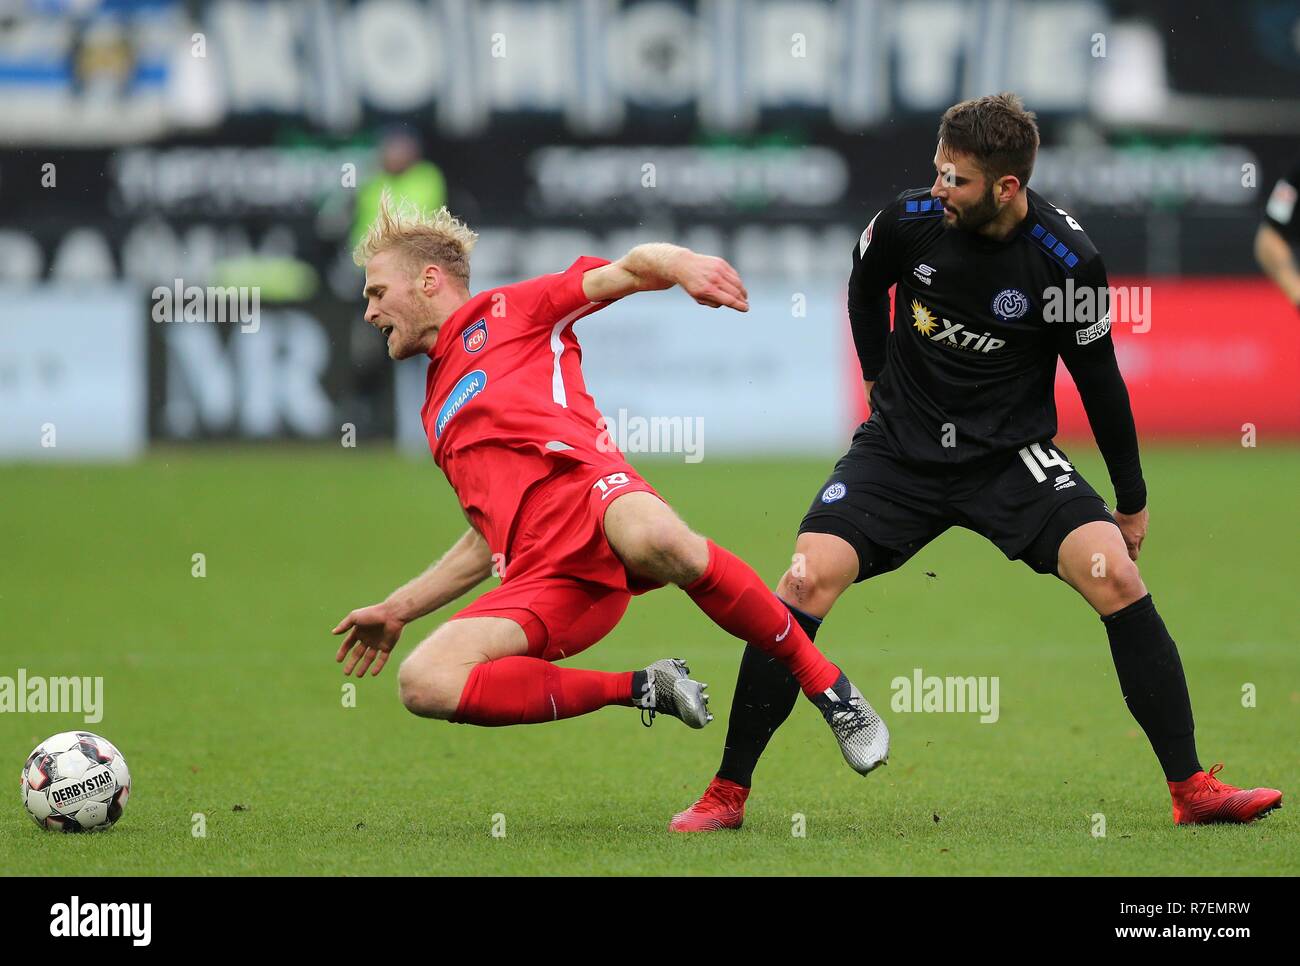 1 Fc Heidenheim Msv Duisburg High Resolution Stock Photography And Images Alamy